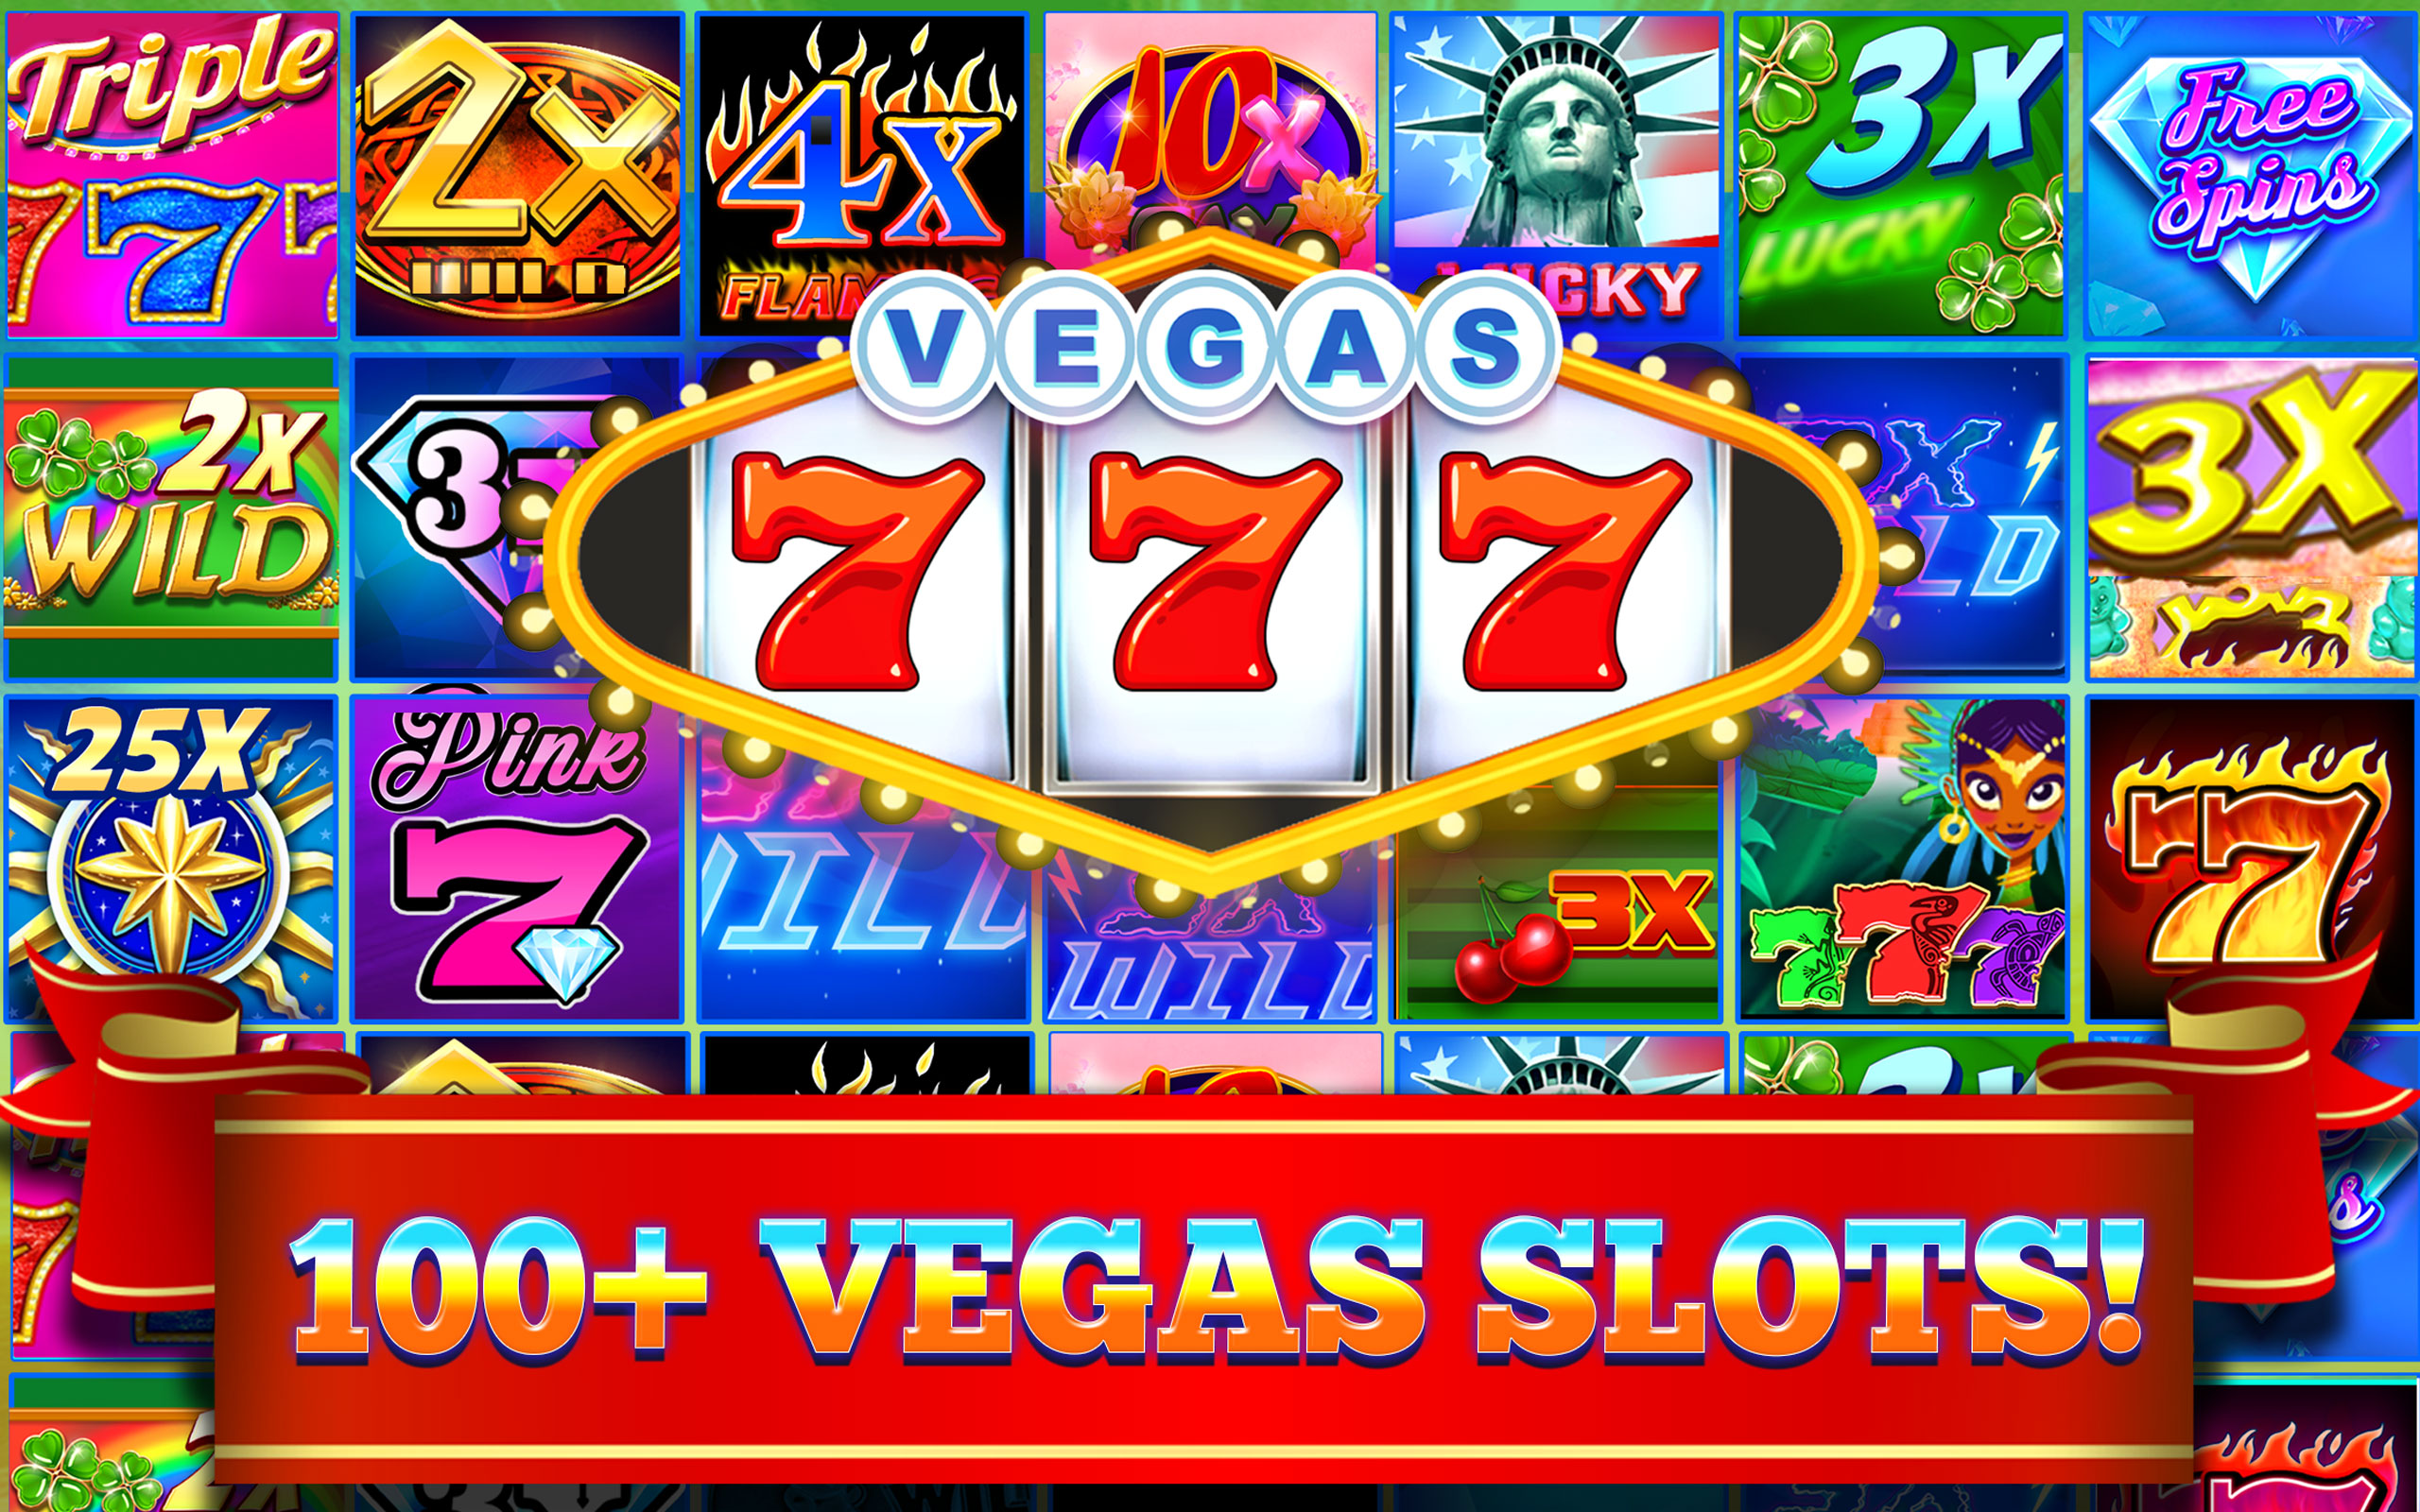 What Are The Best Uk Online Slot Games?